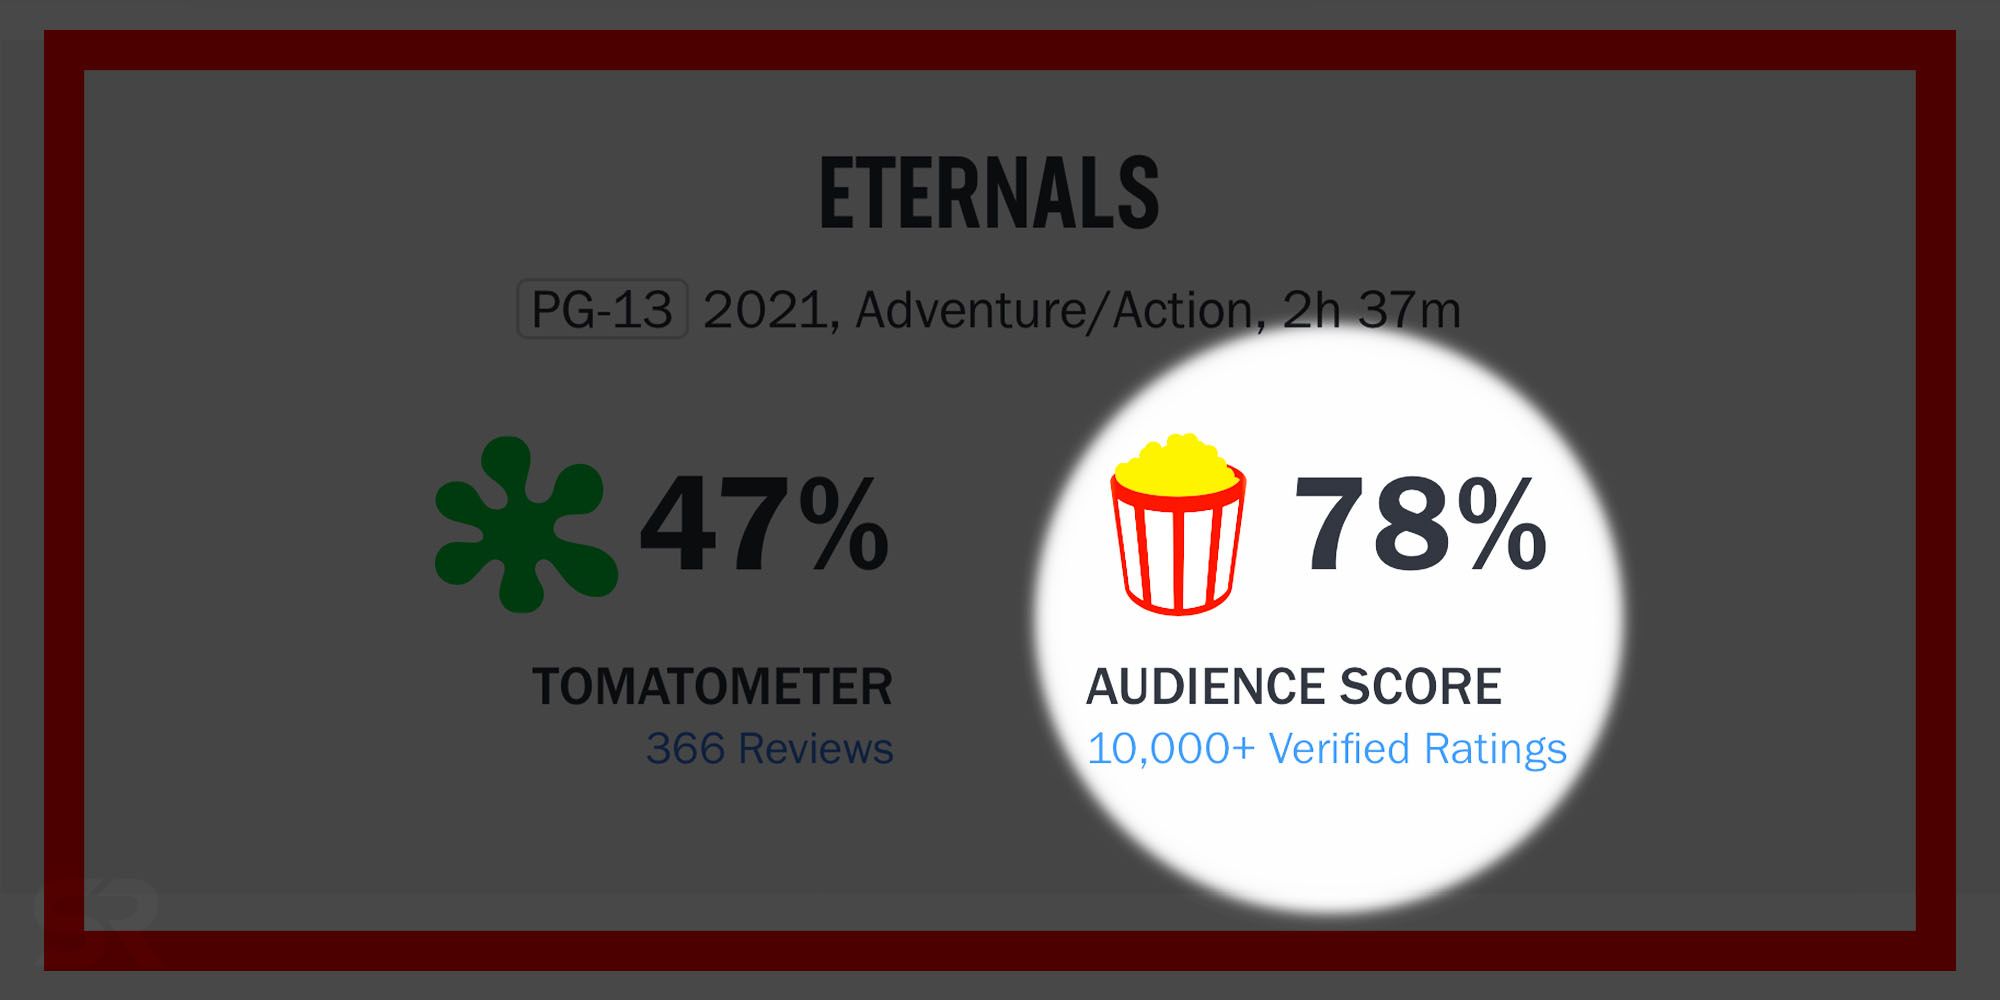 Rotten tomatoes Audience score is most important for movie performance